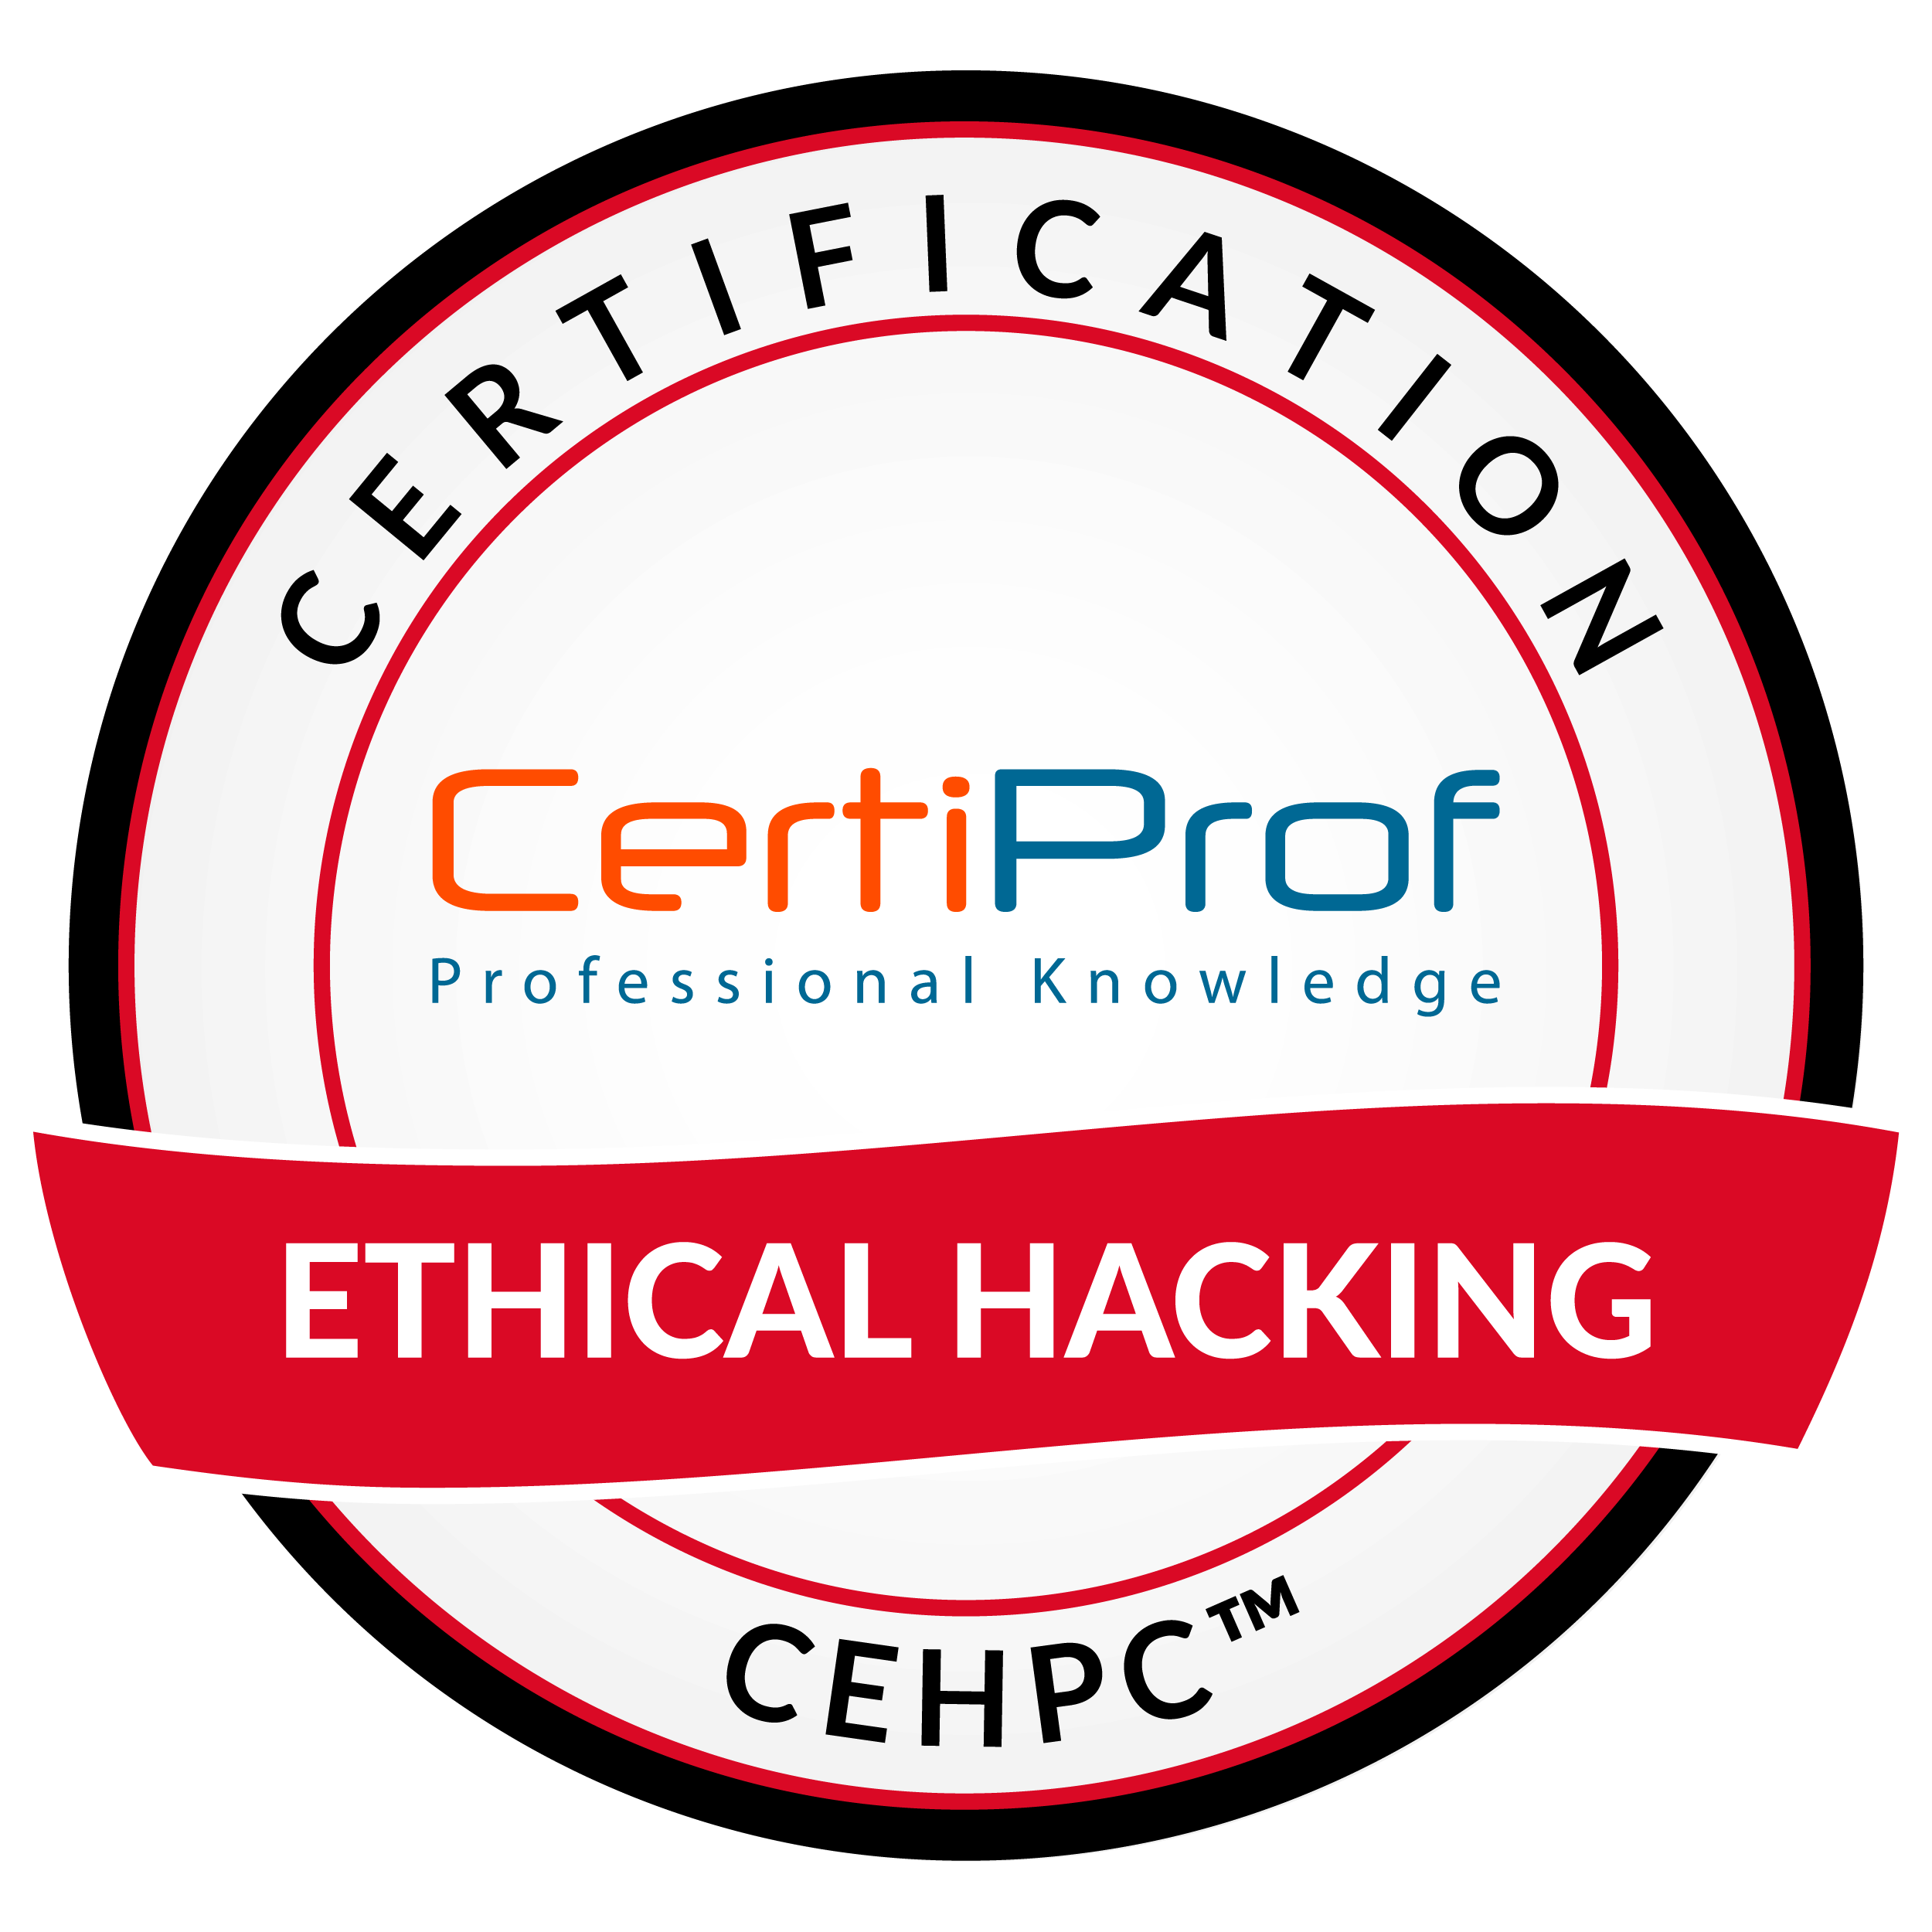 Ethical Hacking Professional Certification - CEHPC™